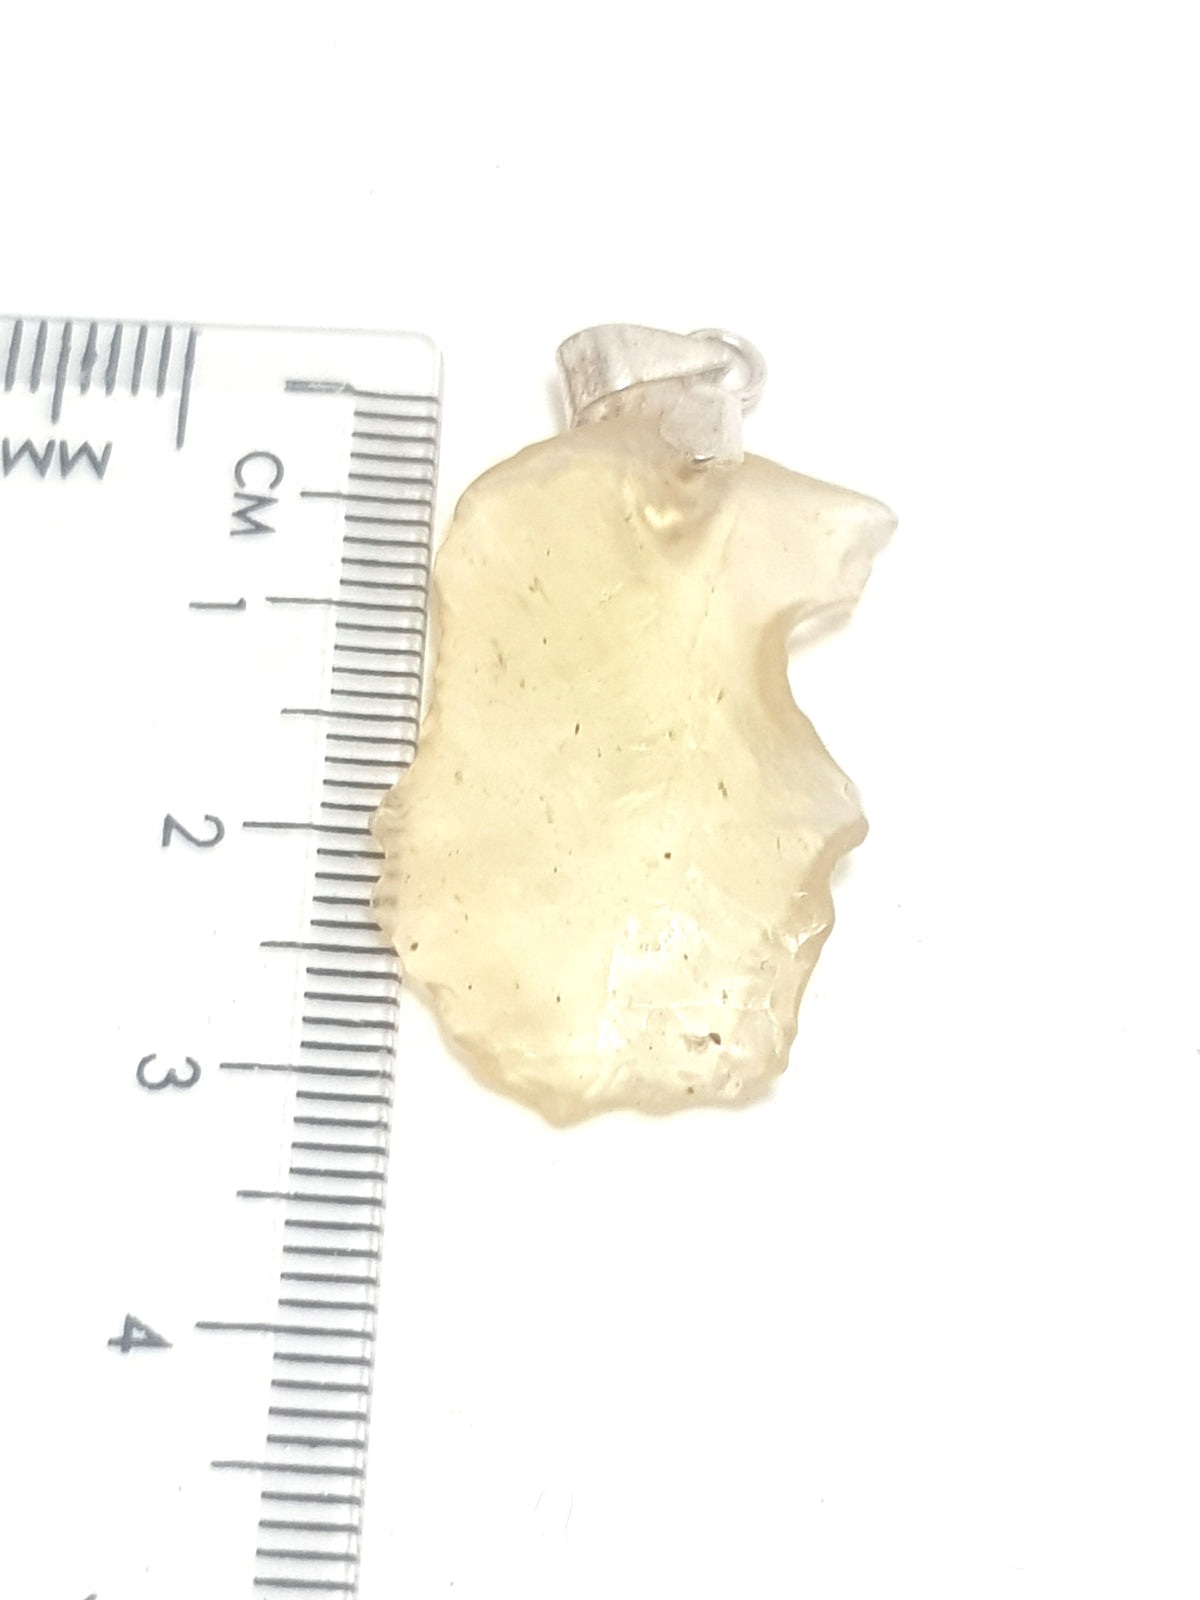 a piece of libyan desert glass against a see through plastic ruler. The sample is 3cm. The libyan desert glass is yellow and translucent with an irregular surface